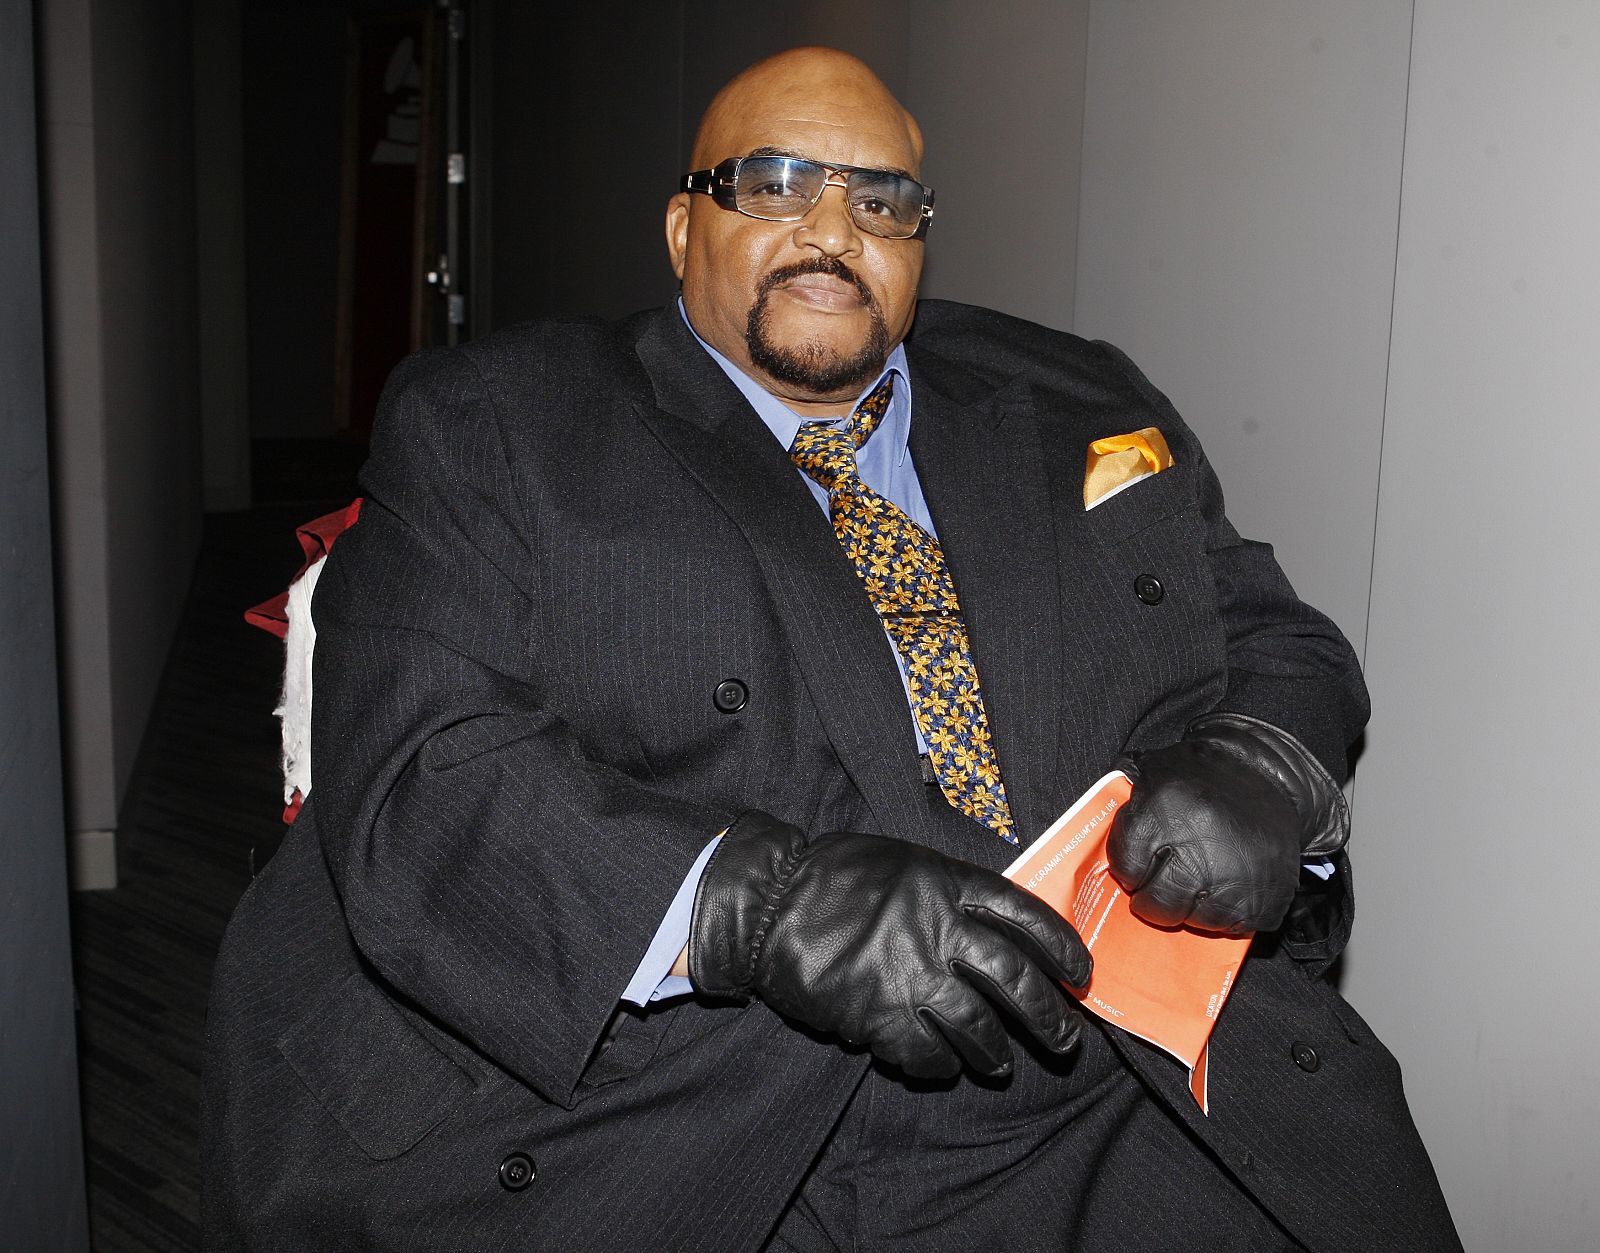 Grammy-winning singer/songwriter Solomon Burke attends An Evening with Jerry Lee Lewis in Los Angeles